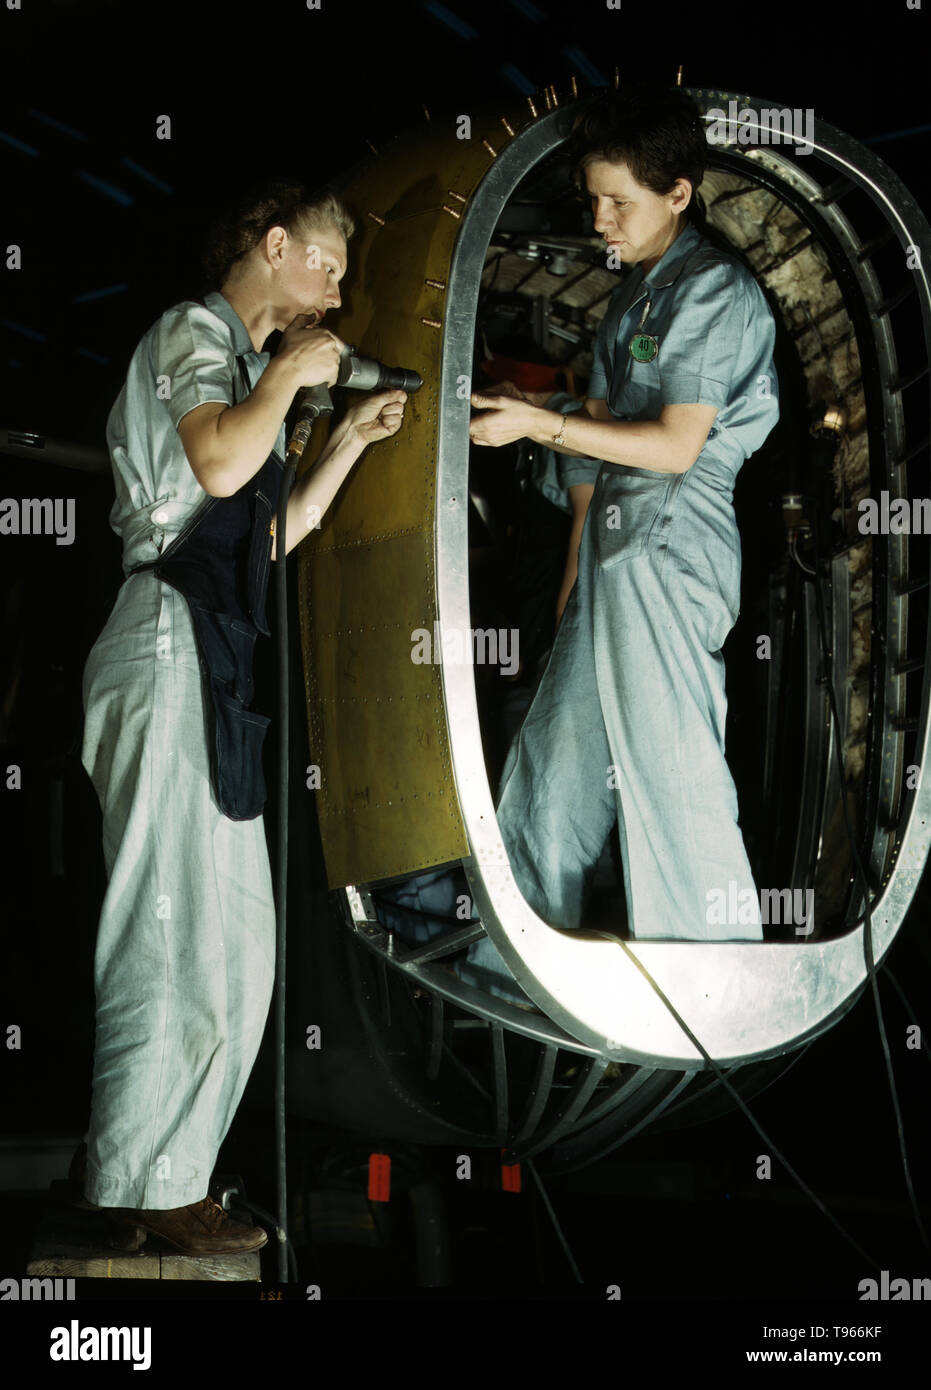 Frances Eggleston, aged 23, came from Oklahoma, used to do office work. Removing paper from pilot's window(?), Consolidated Aircraft Corp., Fort Worth, Texas. Although the image of "Rosie the Riveter" reflected the industrial work of welders and riveters, the majority of working women filled non-factory positions in every sector of the economy. What unified the experiences of these women was that they proved to themselves, and the country, that they could do a man's job and could do it well. Photographed by Howard R. Hollem, 1942. Stock Photo